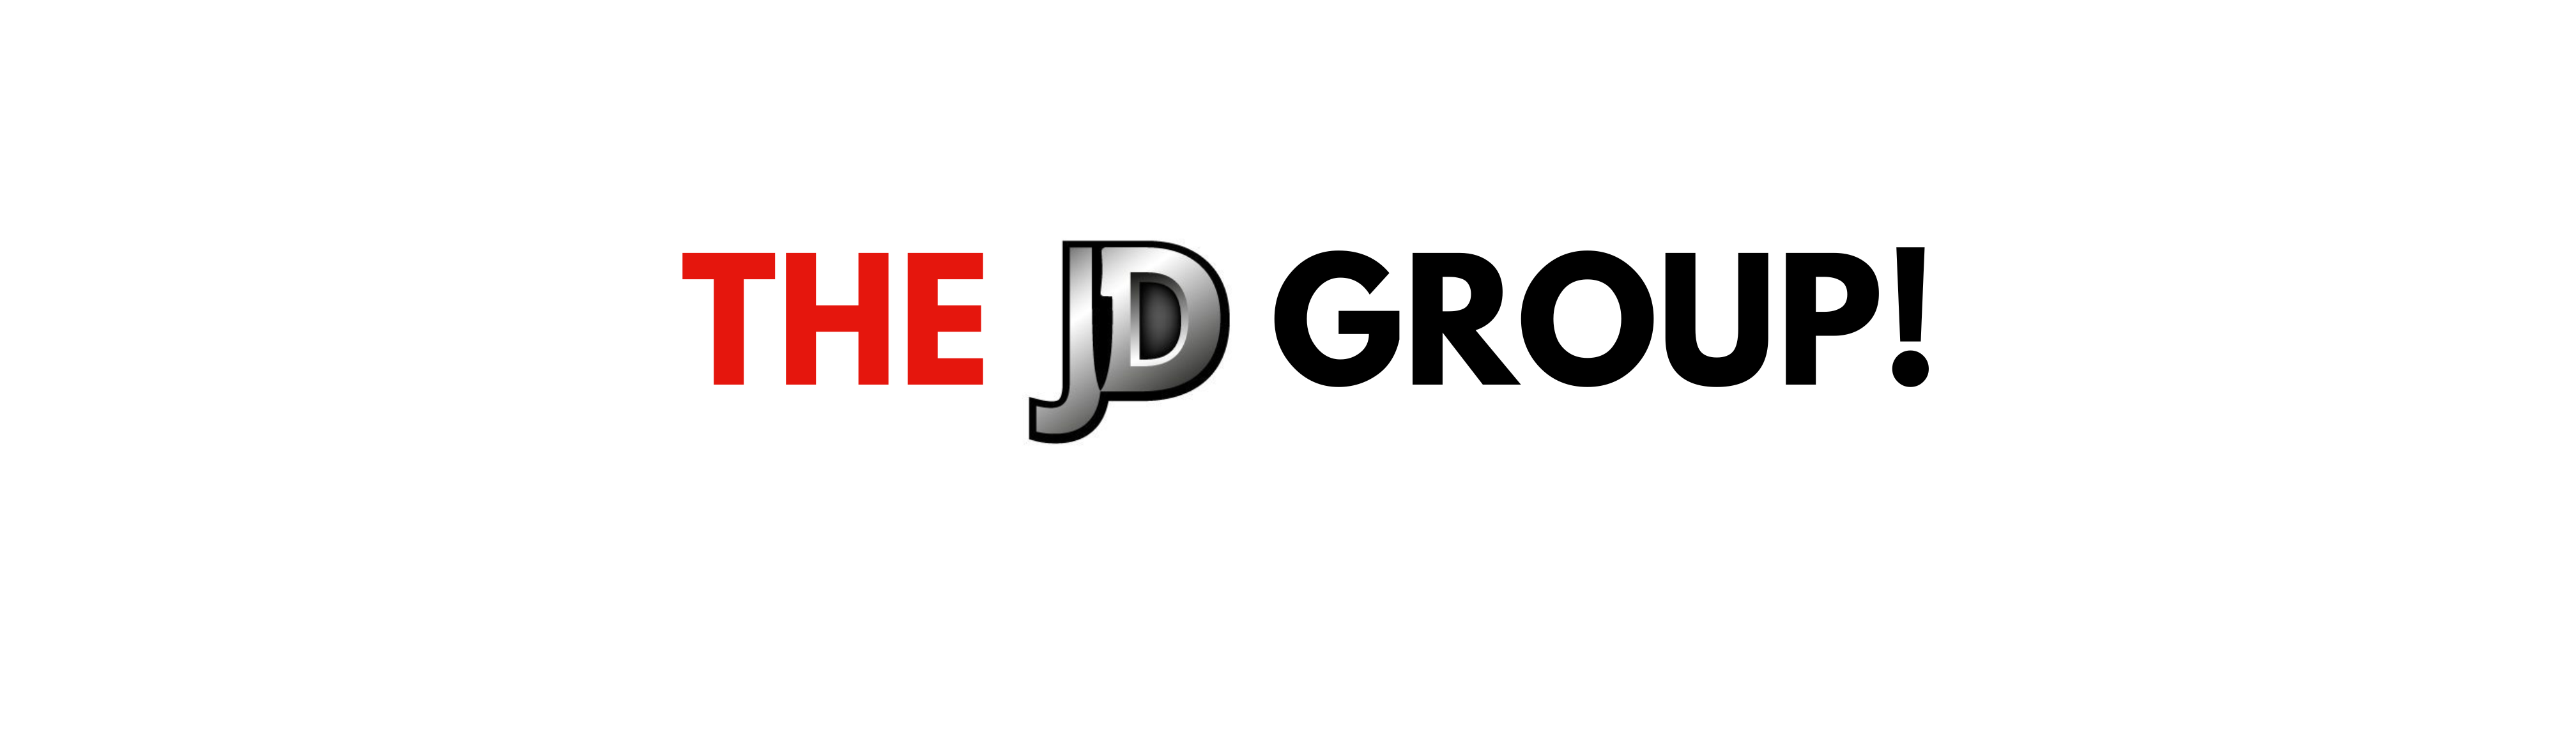 The jd group 1